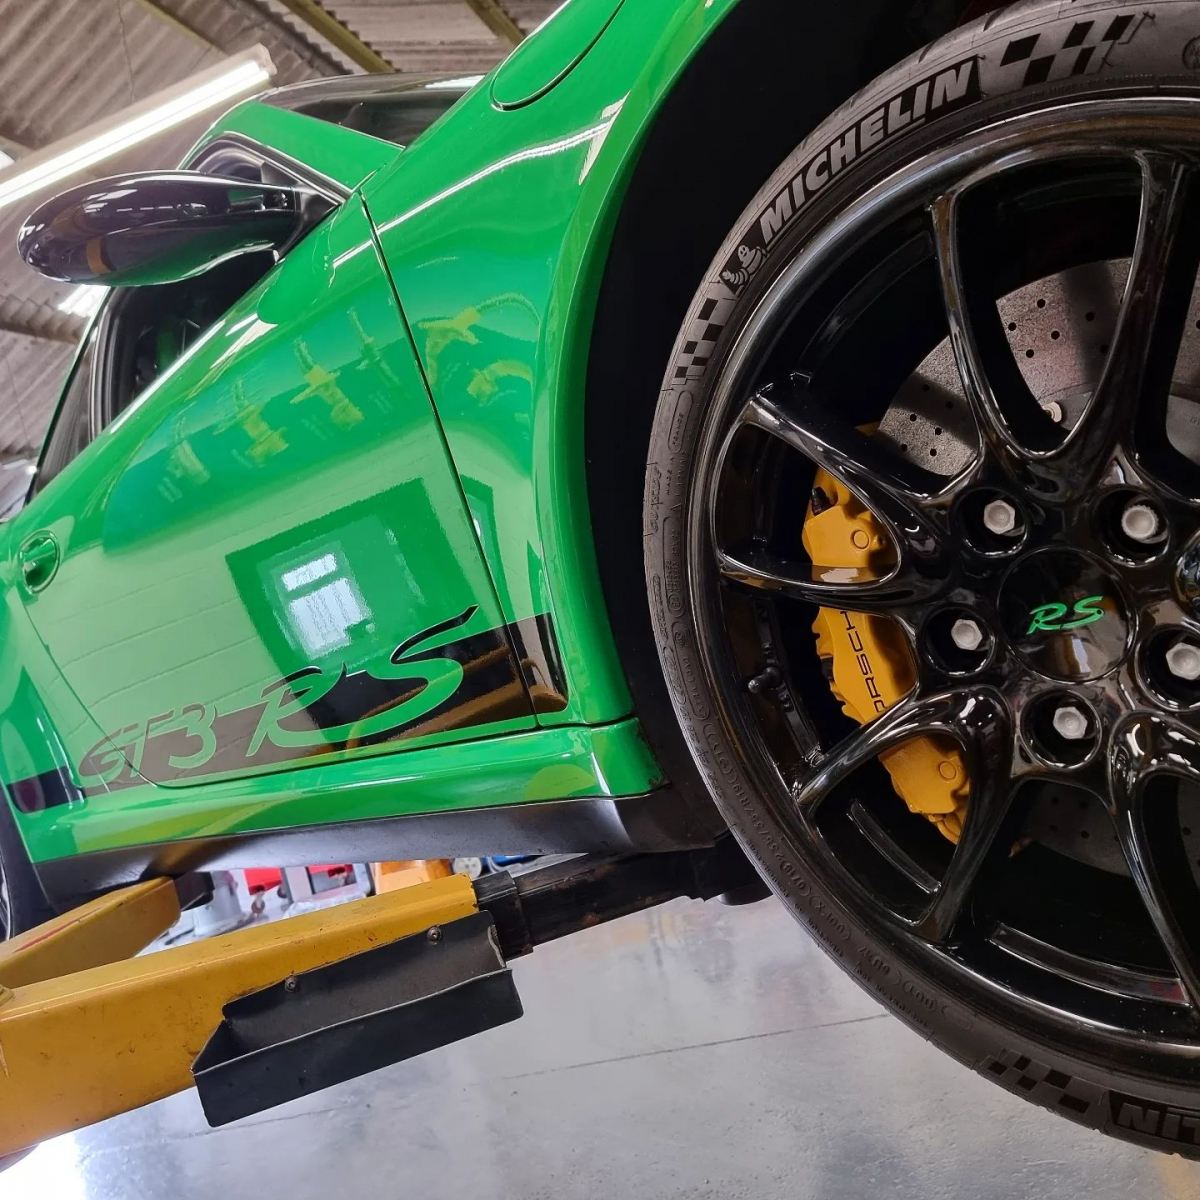 Something a bit special in today for an exhaust swap, letting it shout as it should!

#911 #997GT3rs #vipergreen